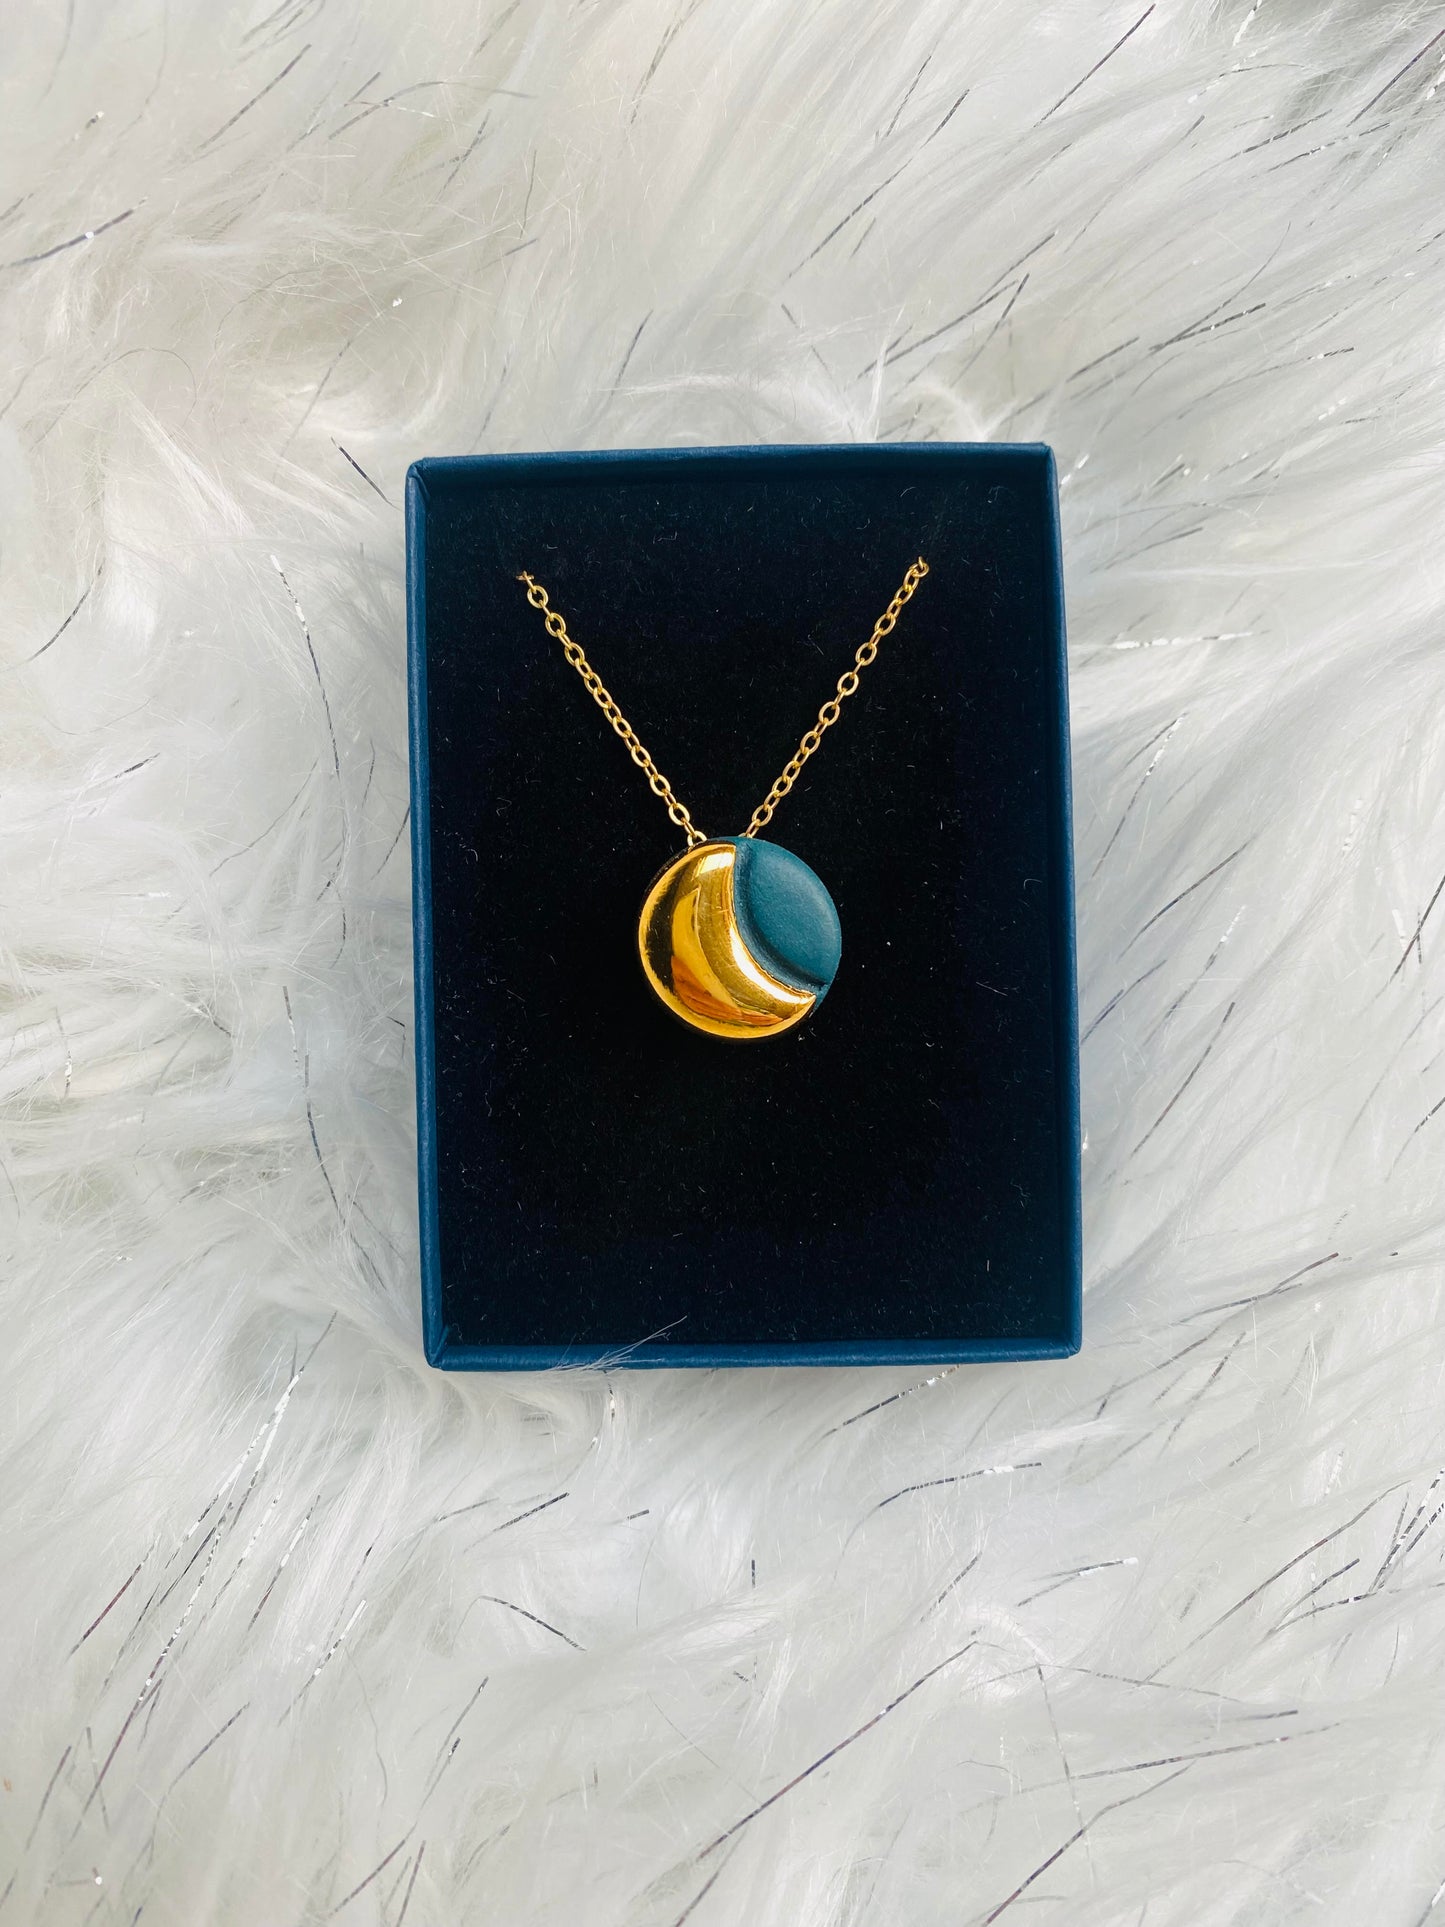 Phases of the Moon Necklace - NO GIFT BOX